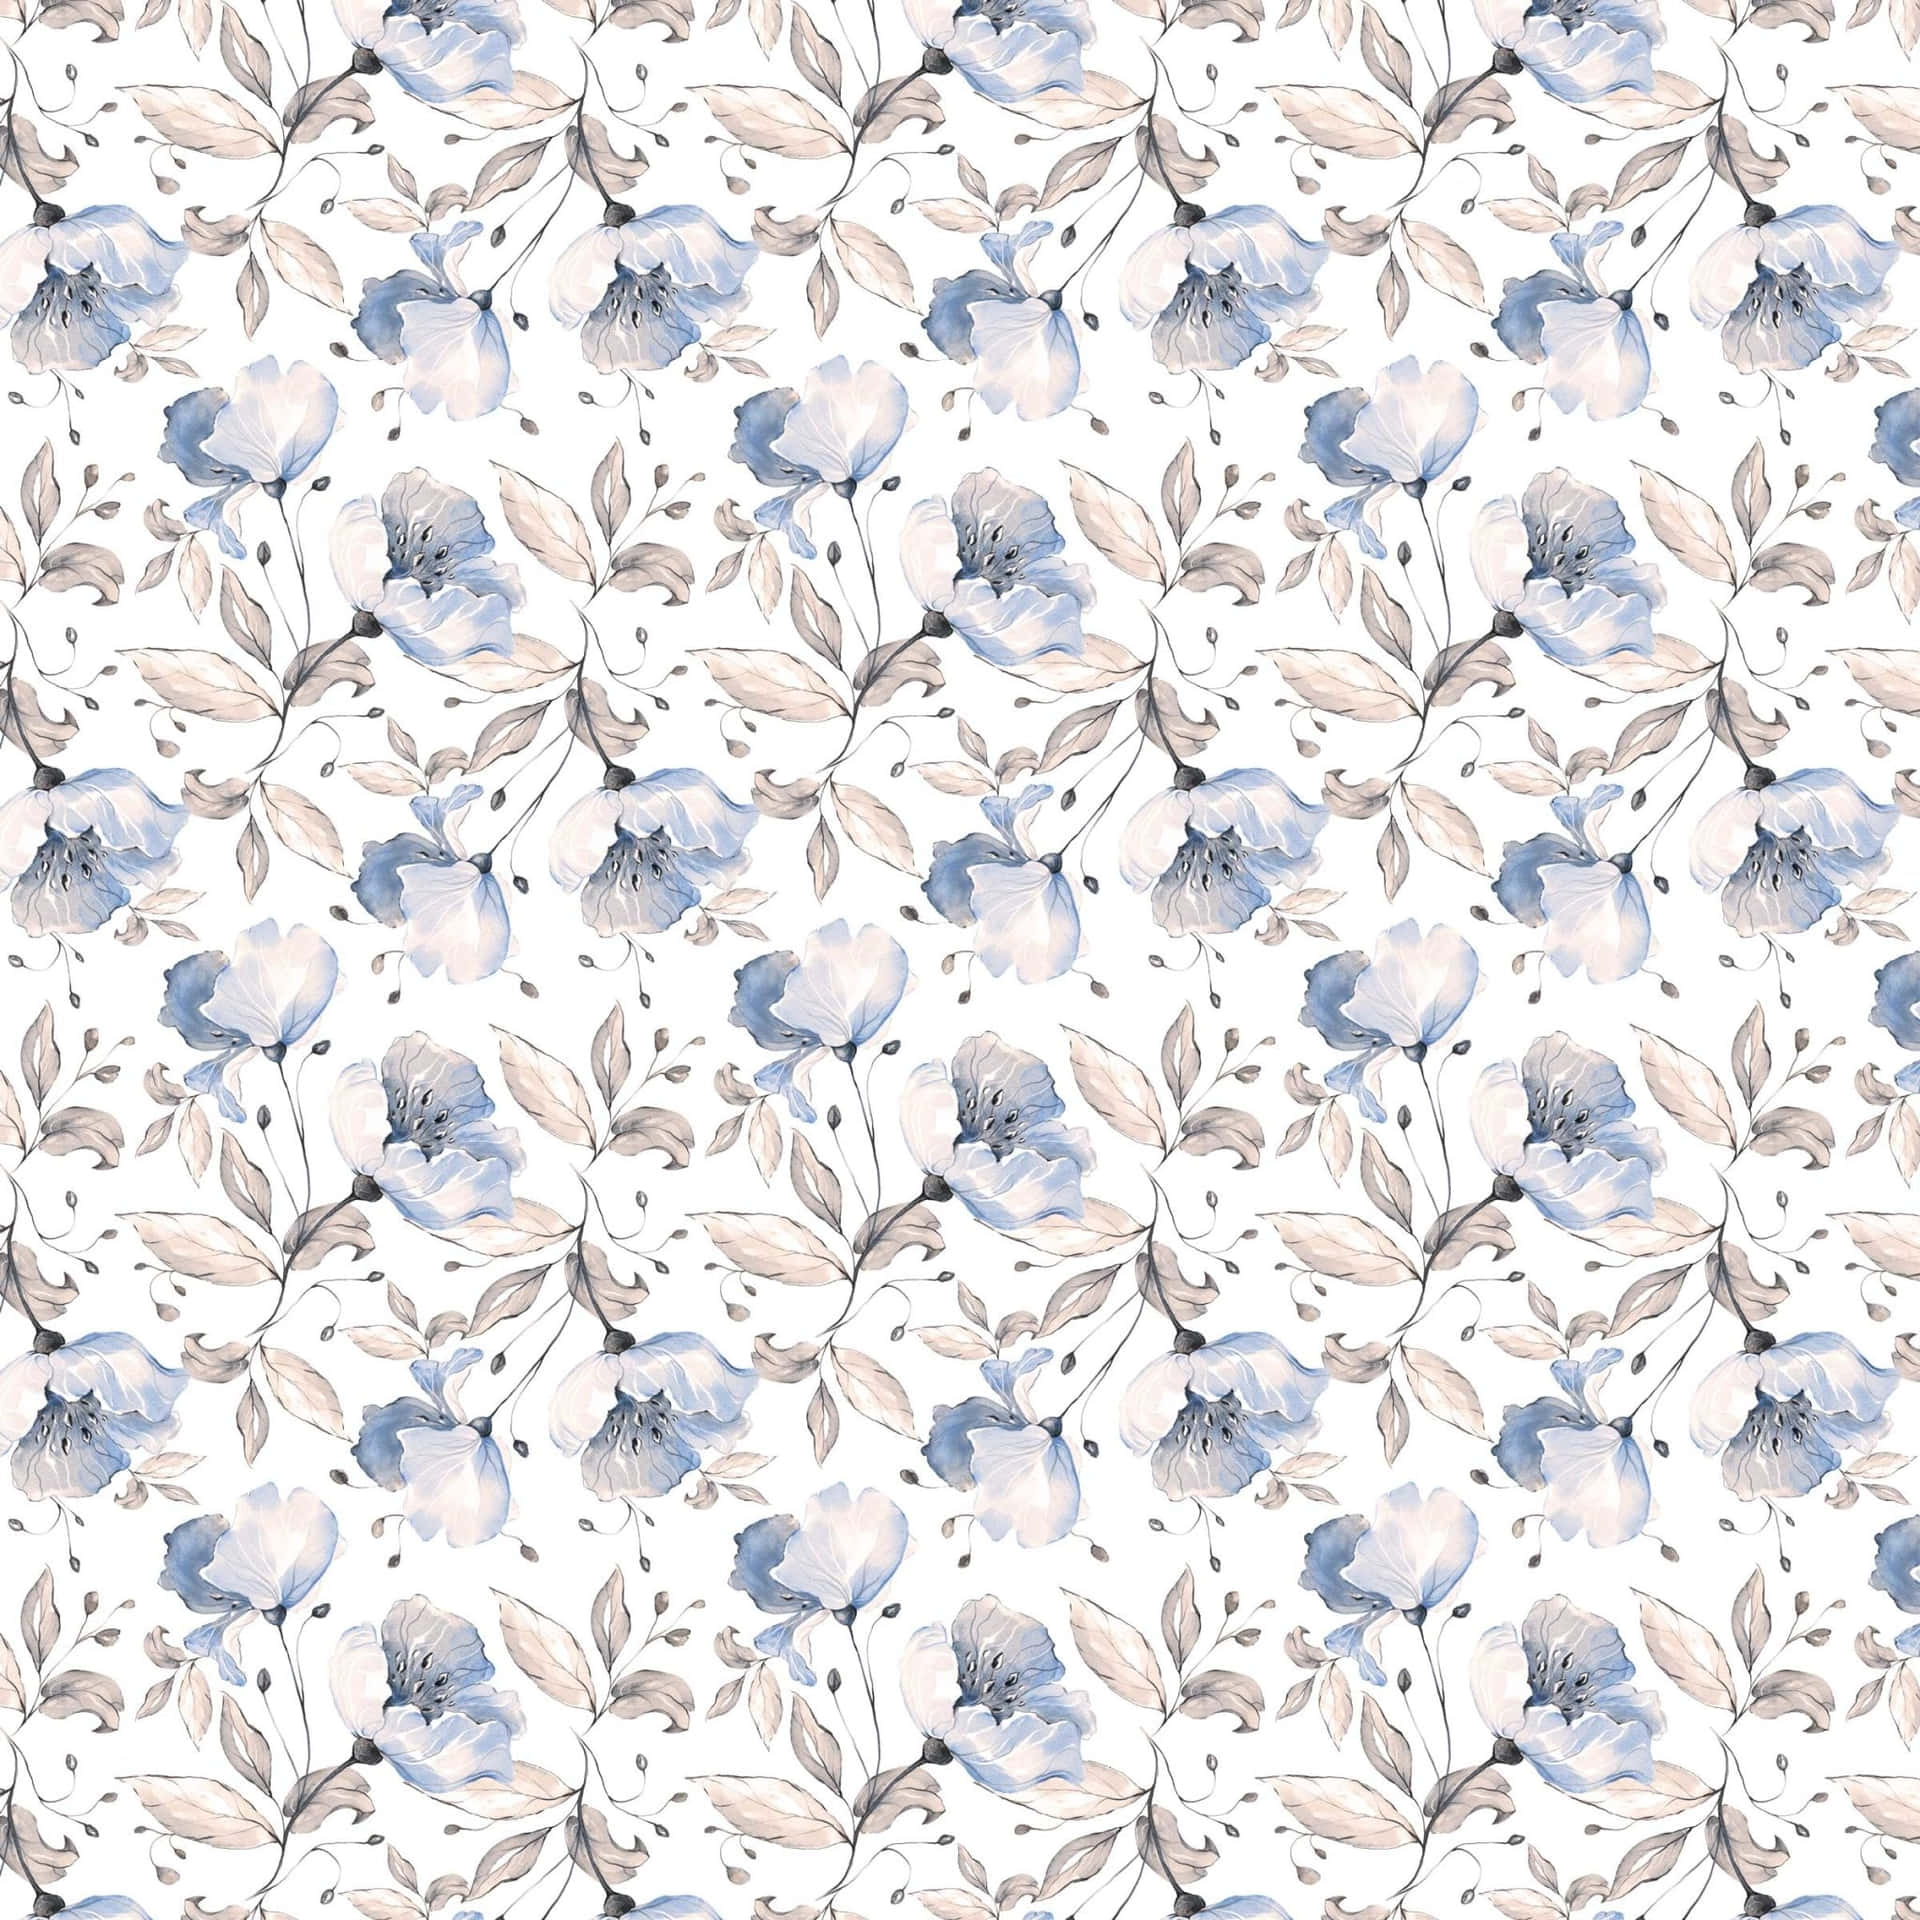 Bright Blue Floral Pattern Wisping Across Crisp White Background